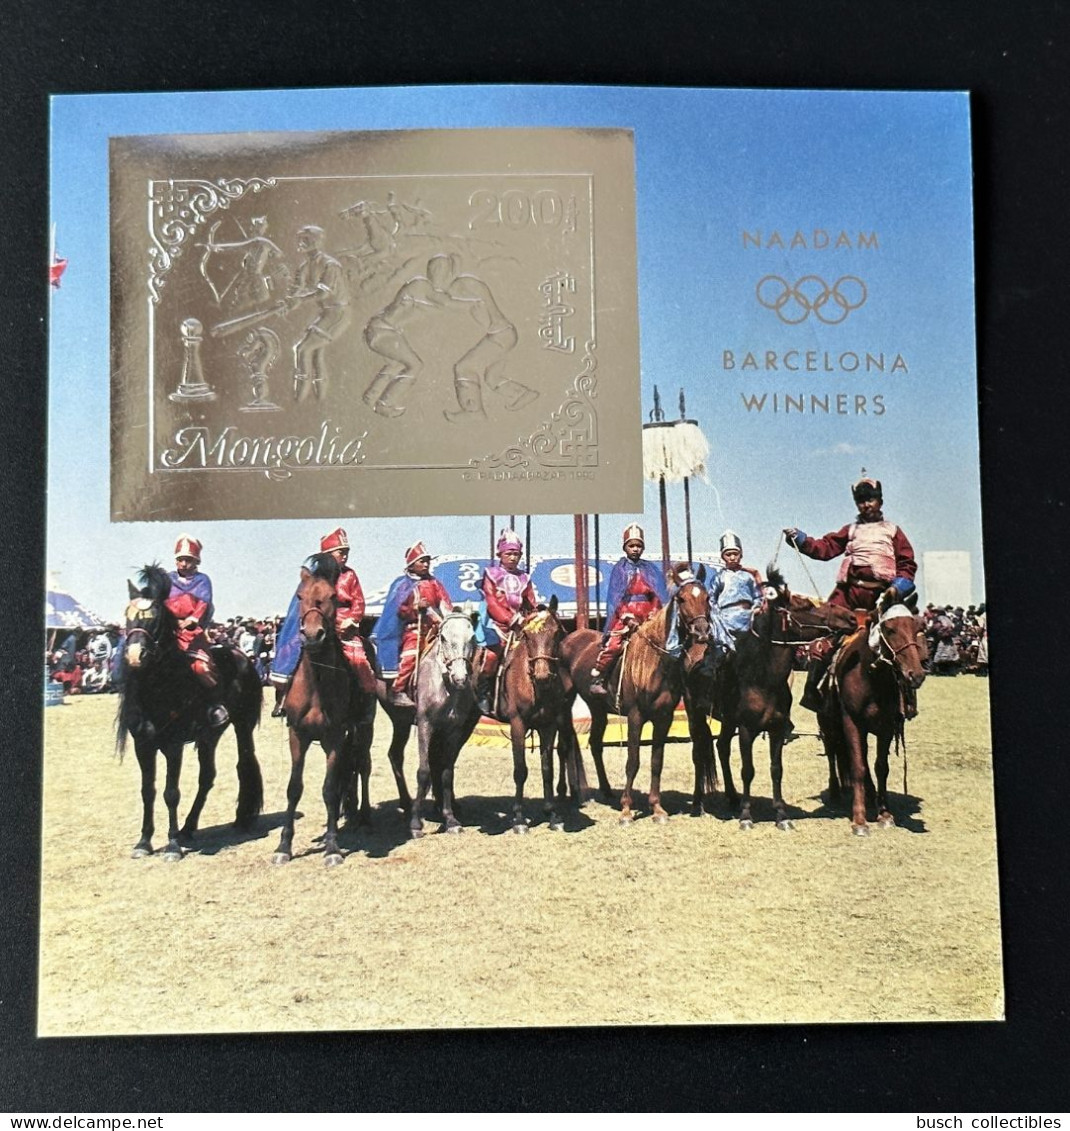 Mongolie Mongolia 1993 Mi. Bl. 209 Silver Argent Olympic Games Barcelona 1992 Chess Horse Cheval Pferd Jeux Olympiques - Sommer 1992: Barcelone